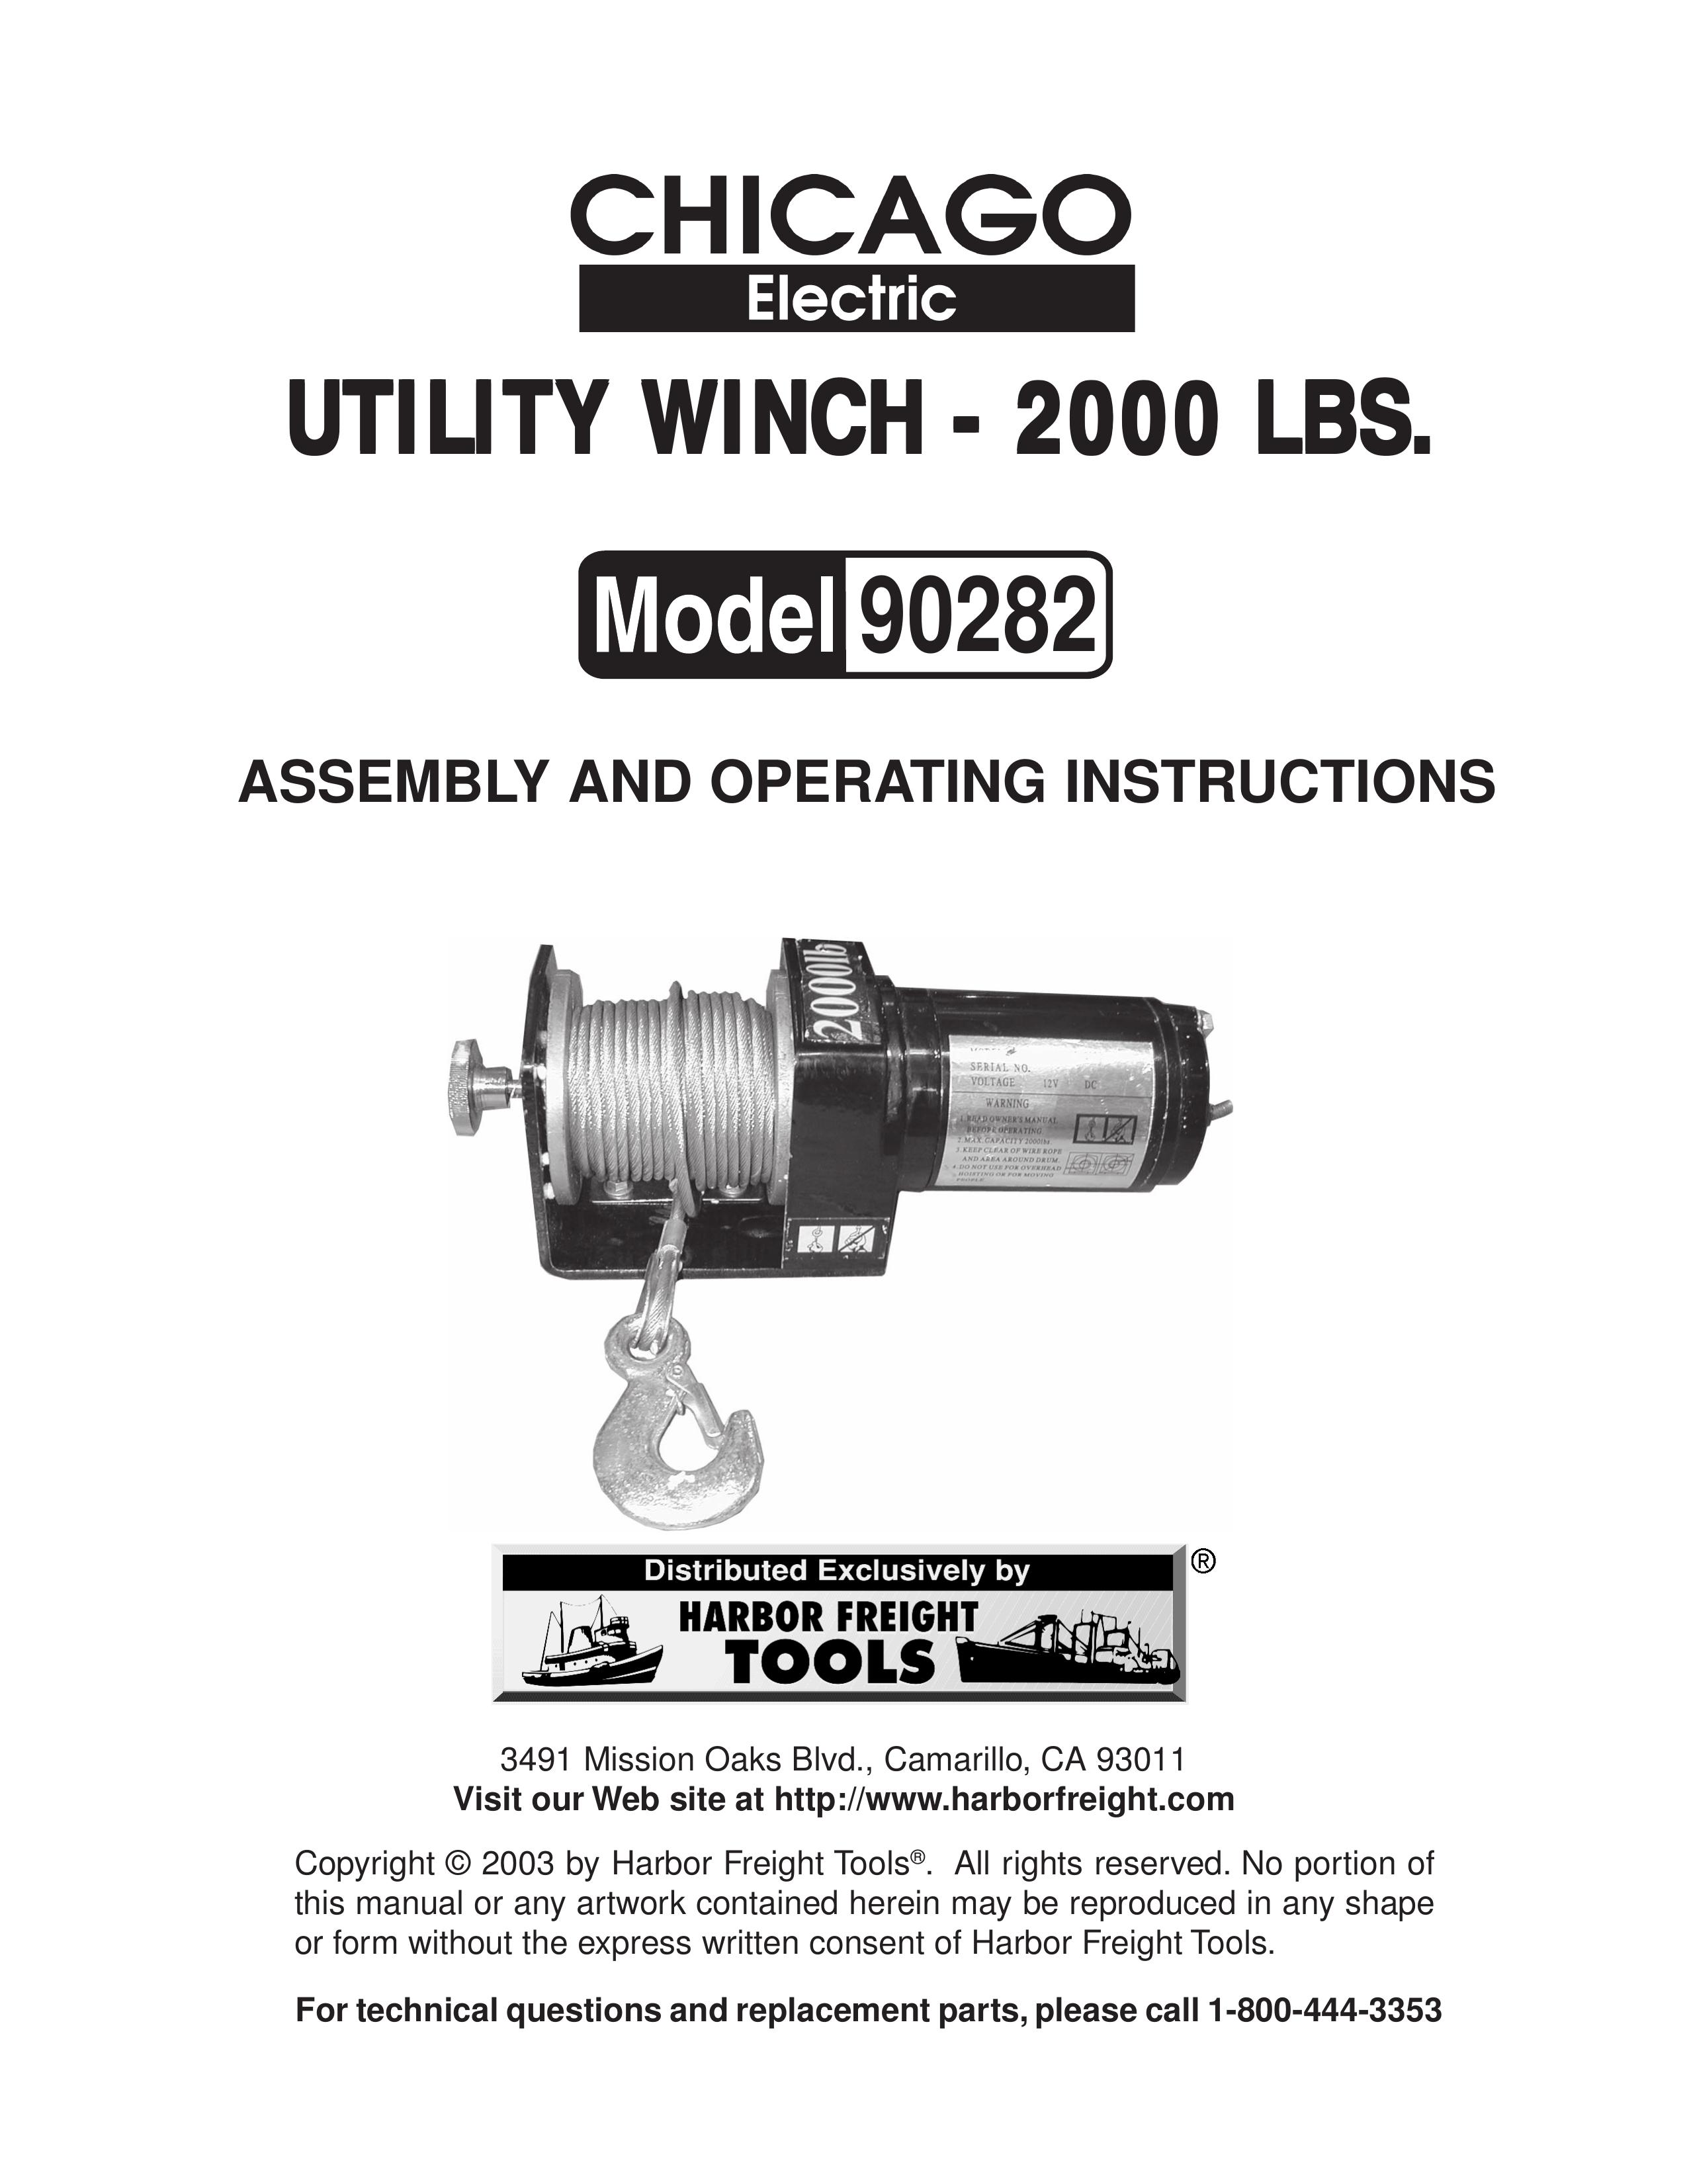 Chicago Electric 90282 Utility Vehicle User Manual